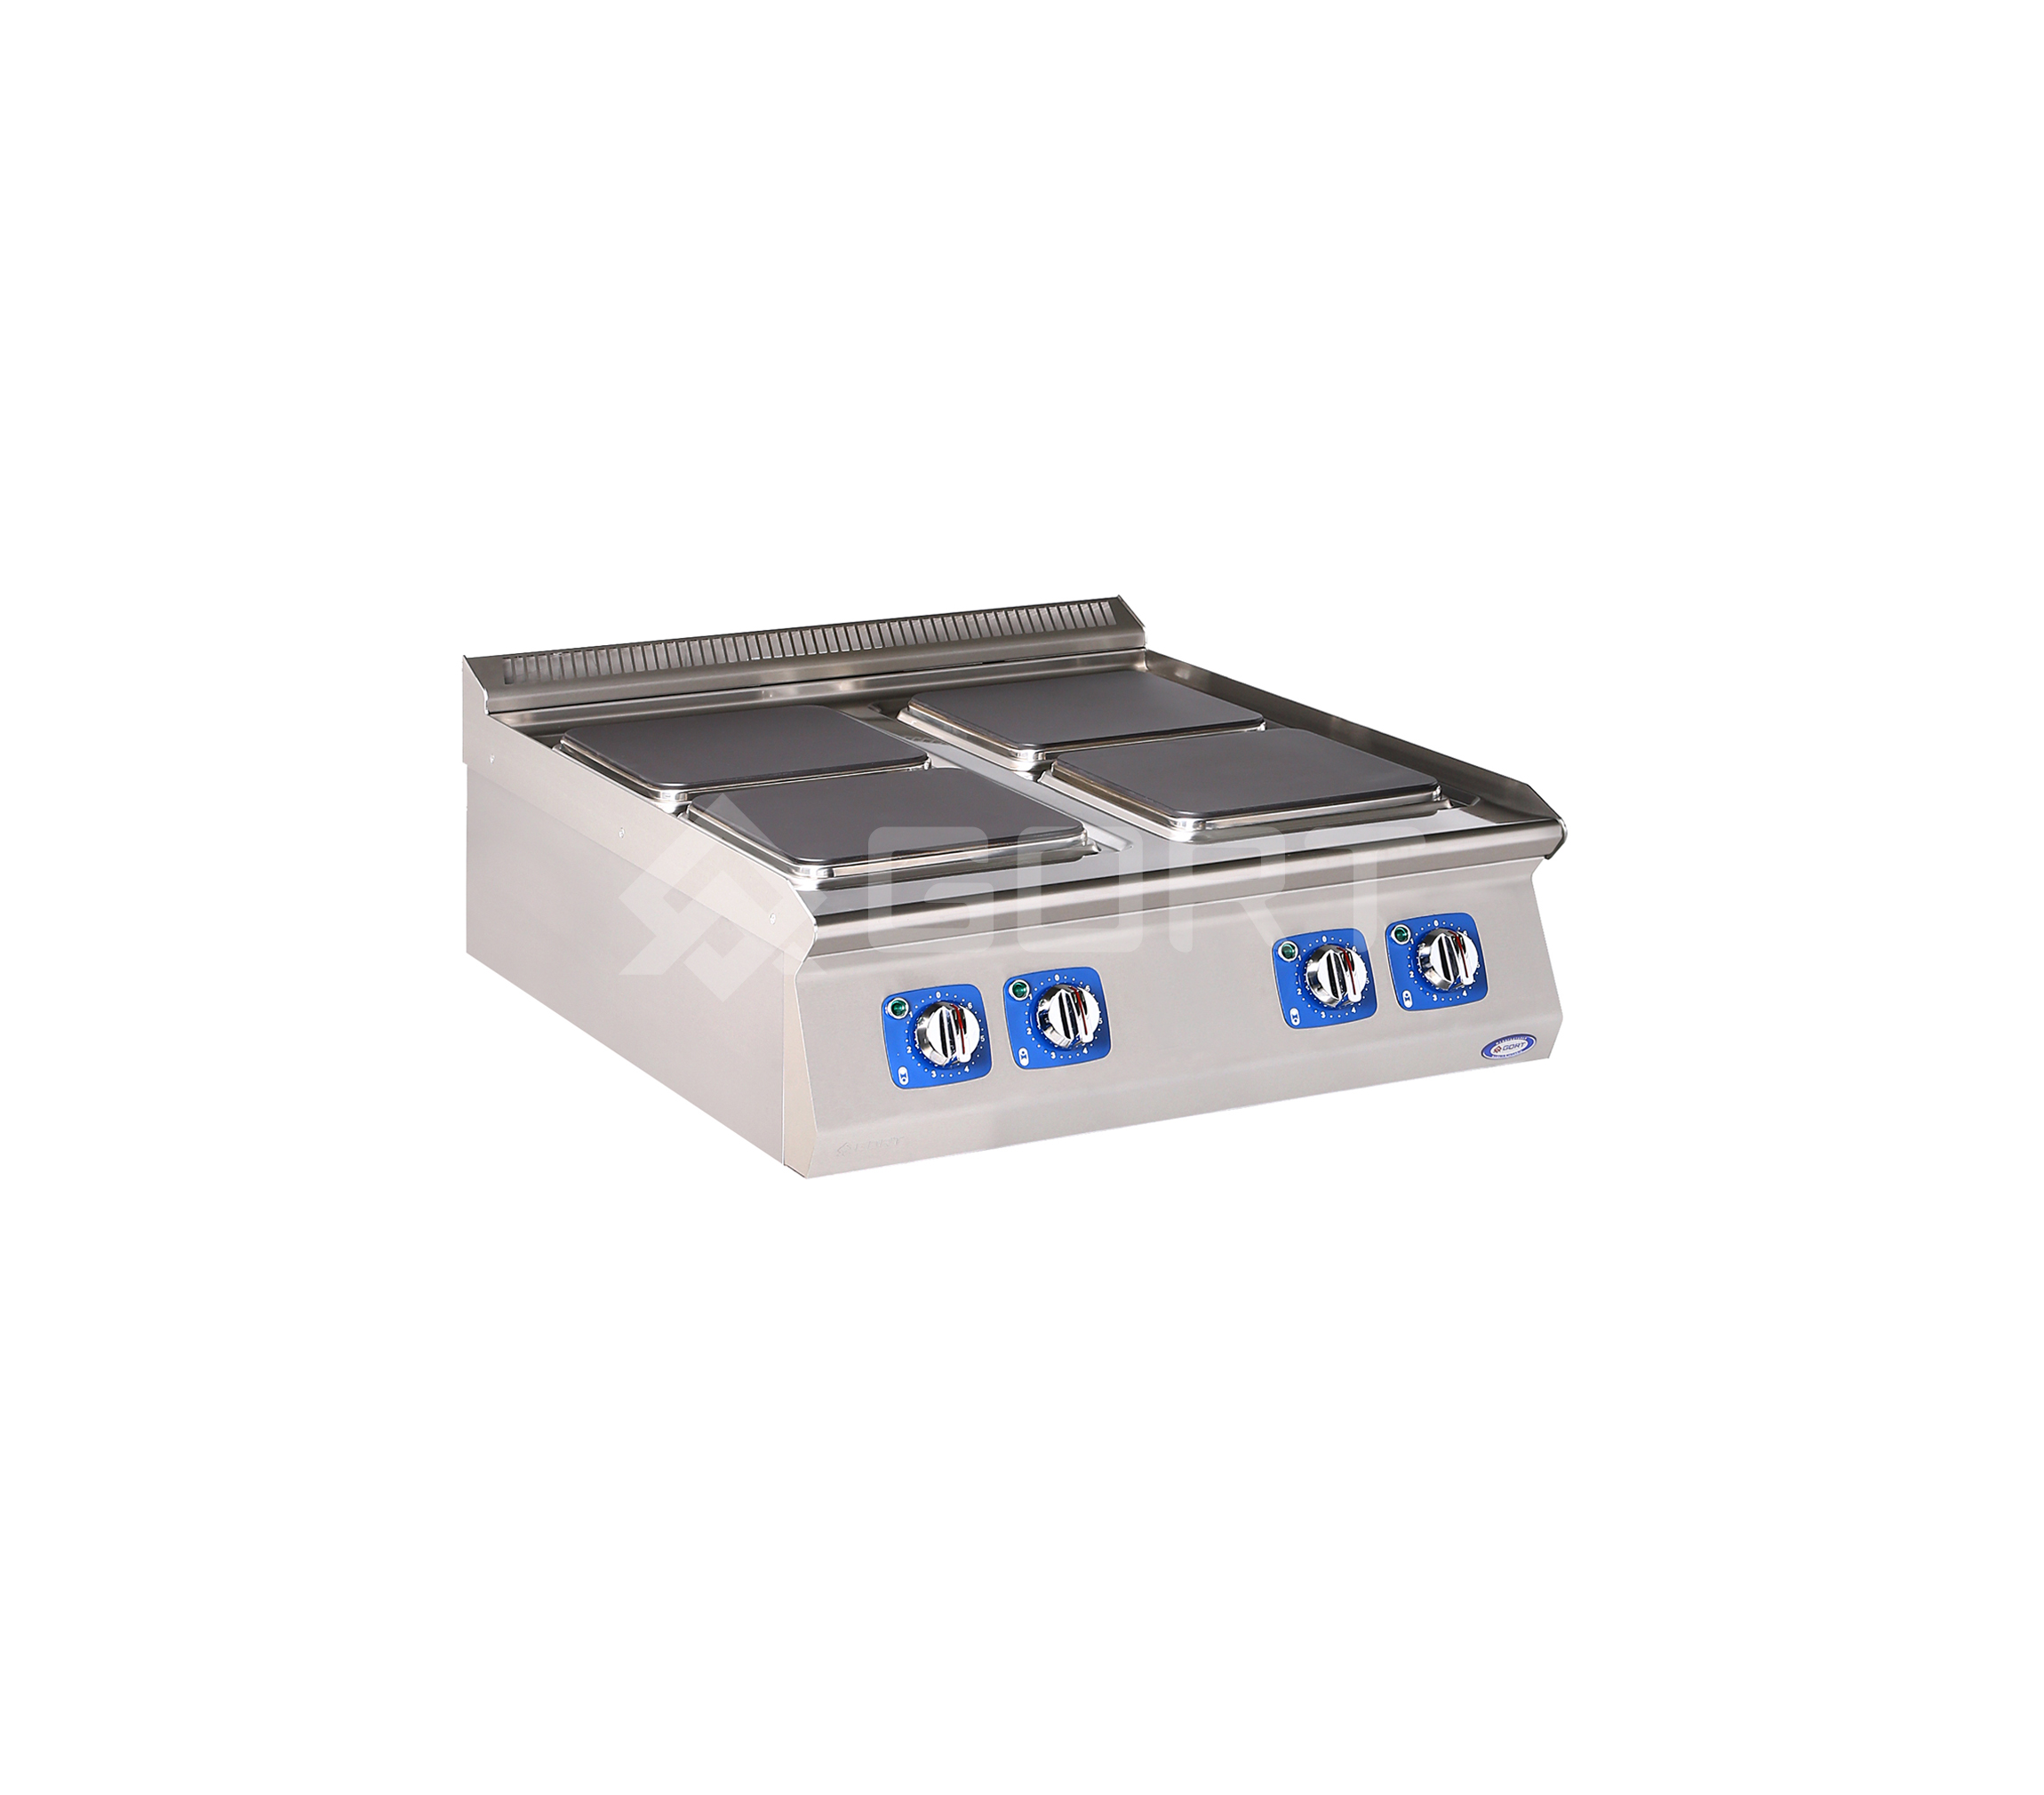 4 plate electric cooking top L900